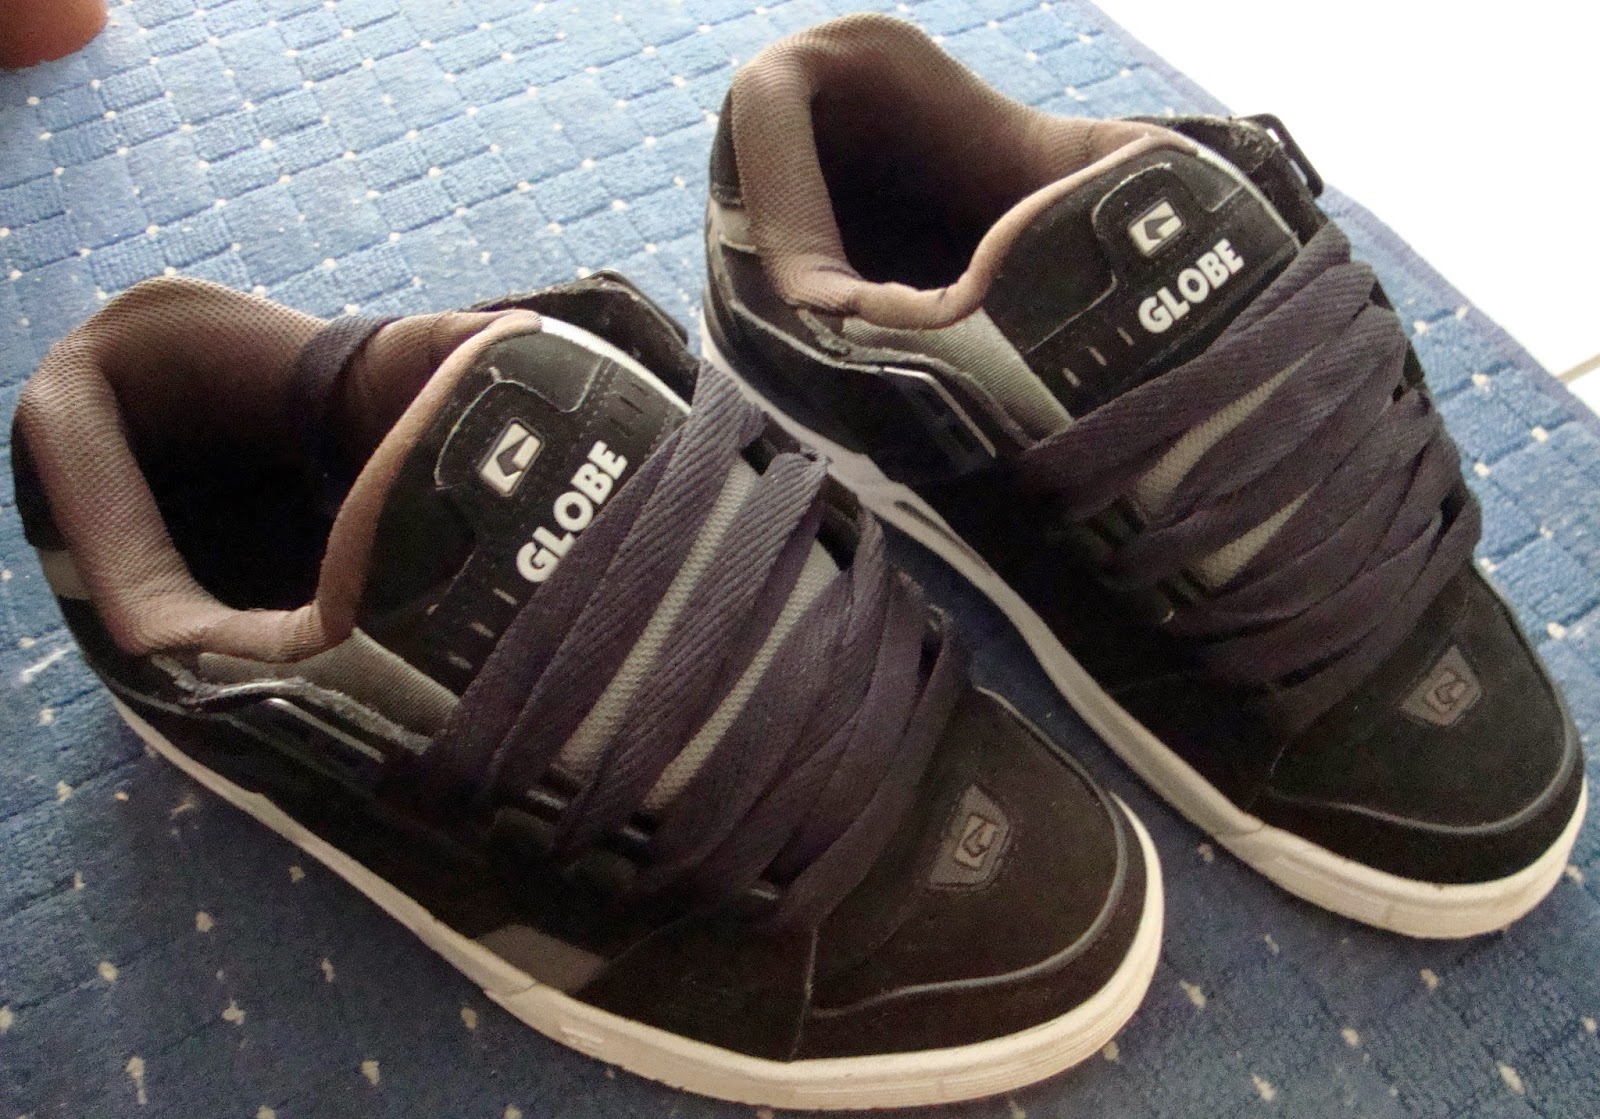 Buy > chaussures globe sabre > in stock